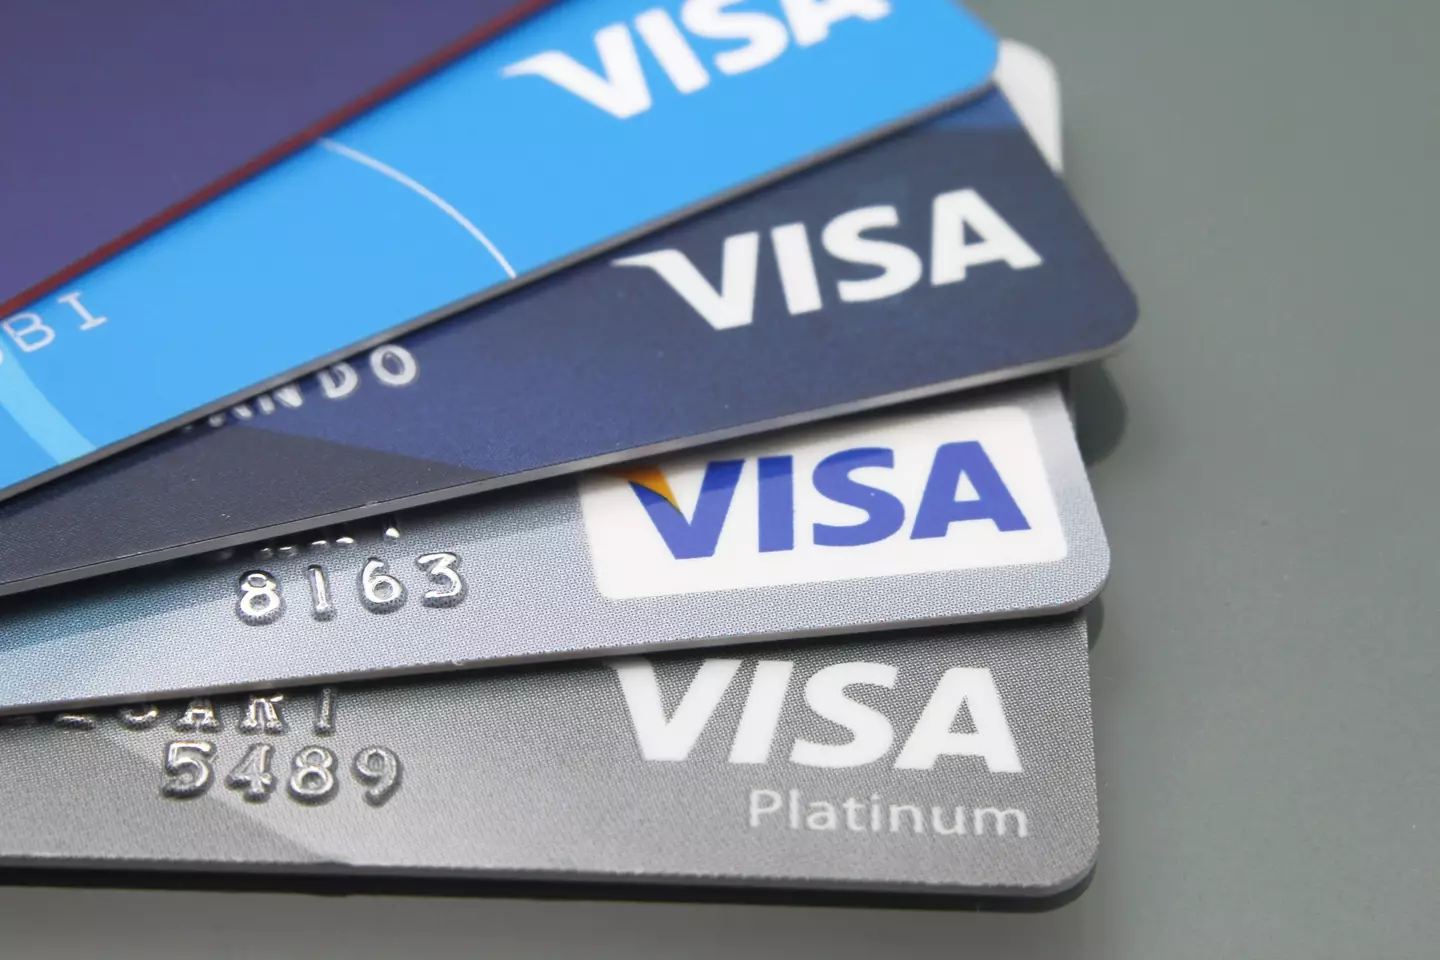 The Visa/Apple combination is thought to be most insecure (